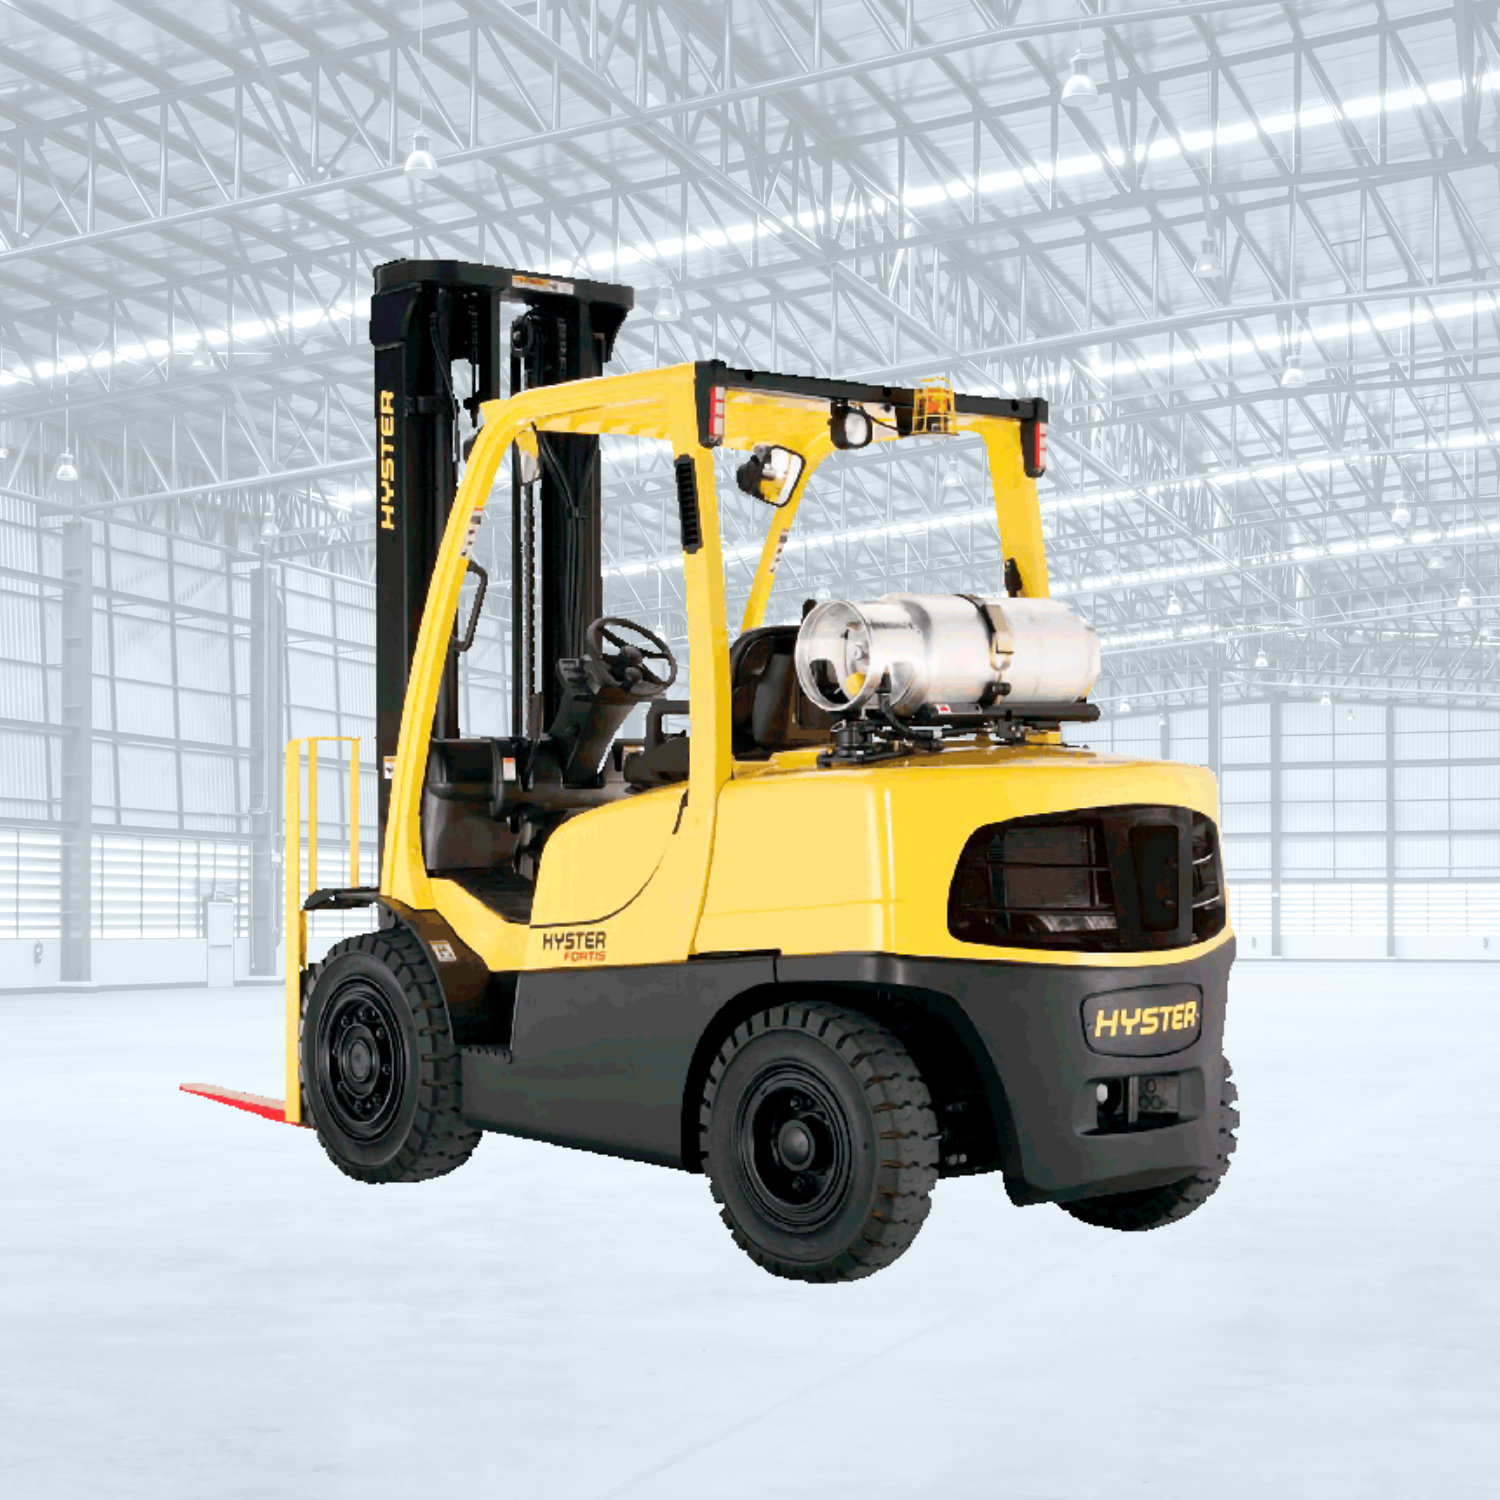 Save big on parts for your Hyster